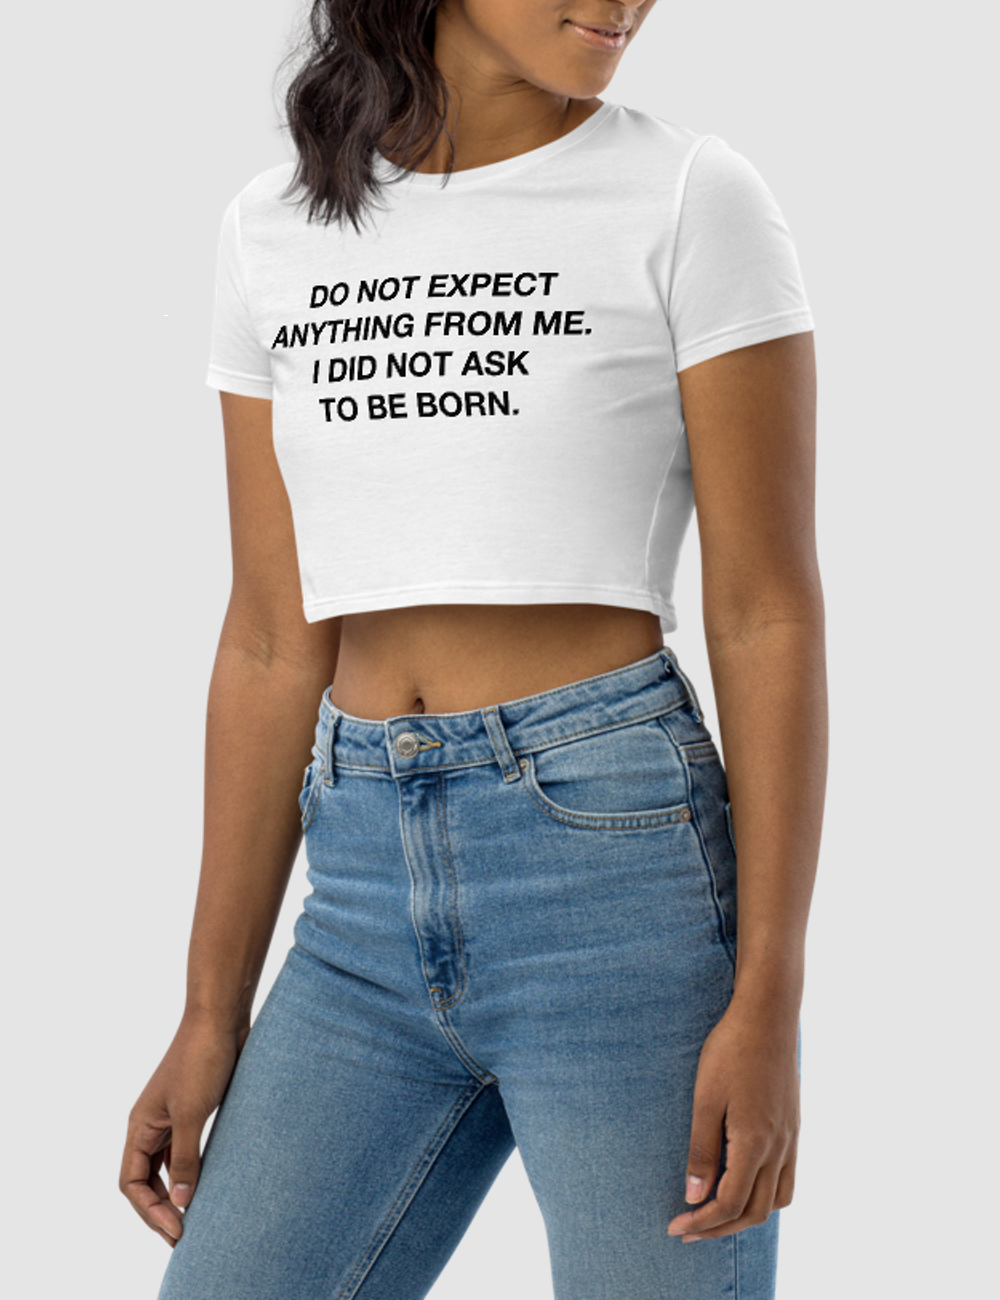 Do Not Expect Anything From Me | Women's Crop Top T-Shirt OniTakai